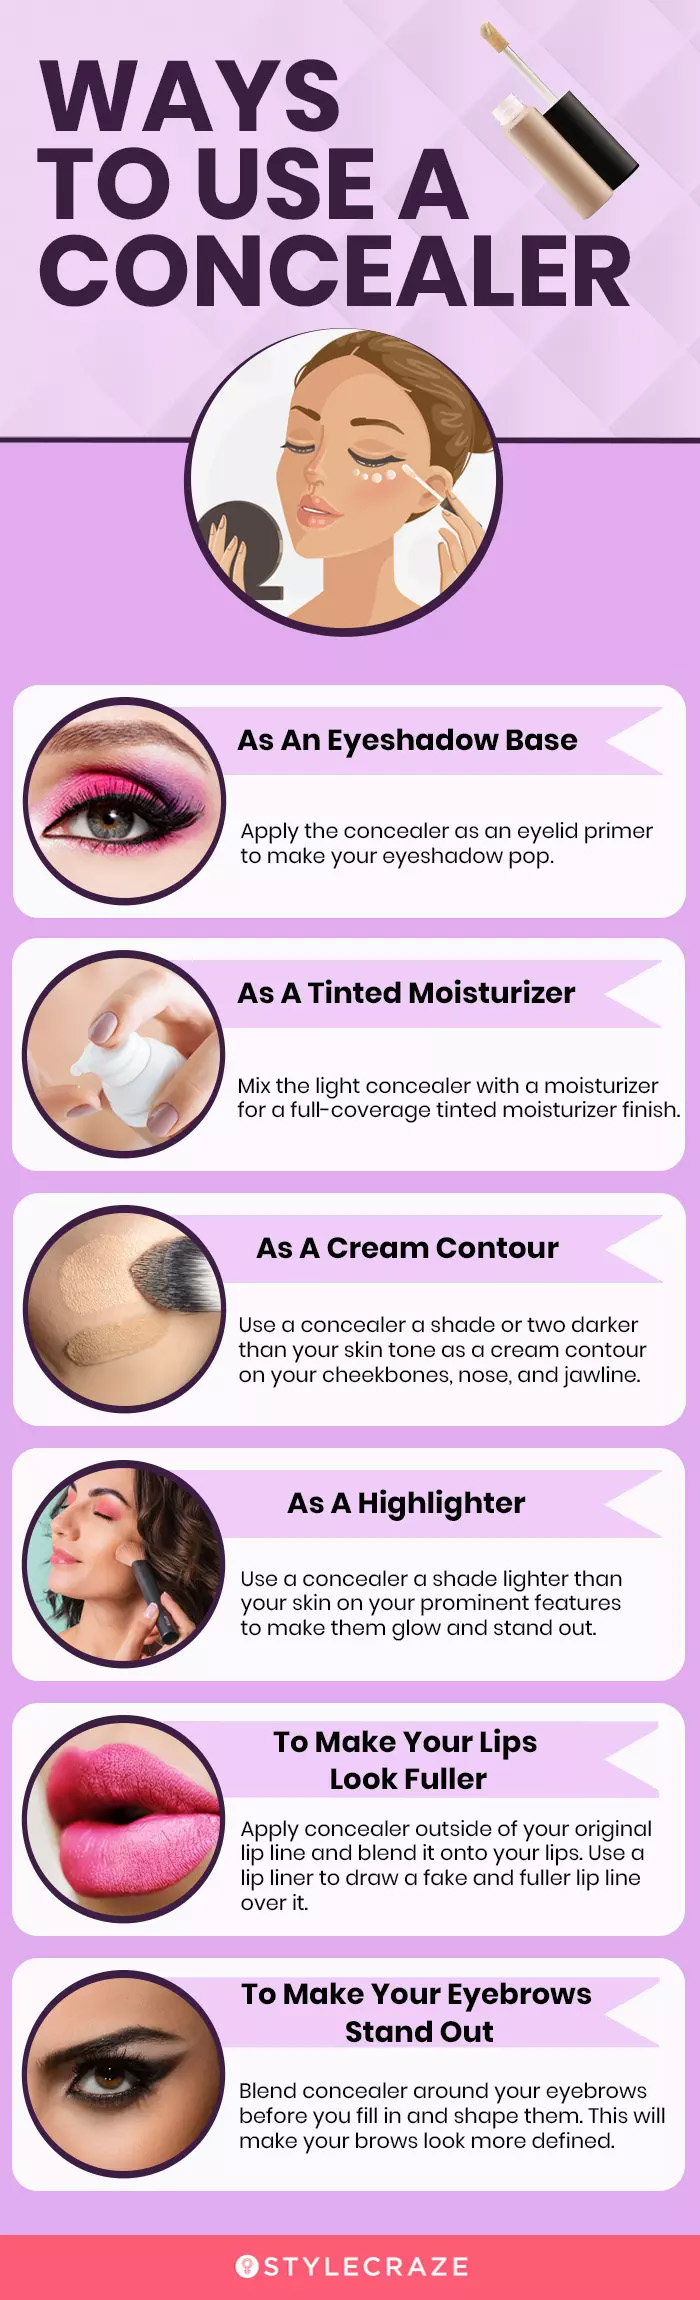 ways to use a concealer (infographic)